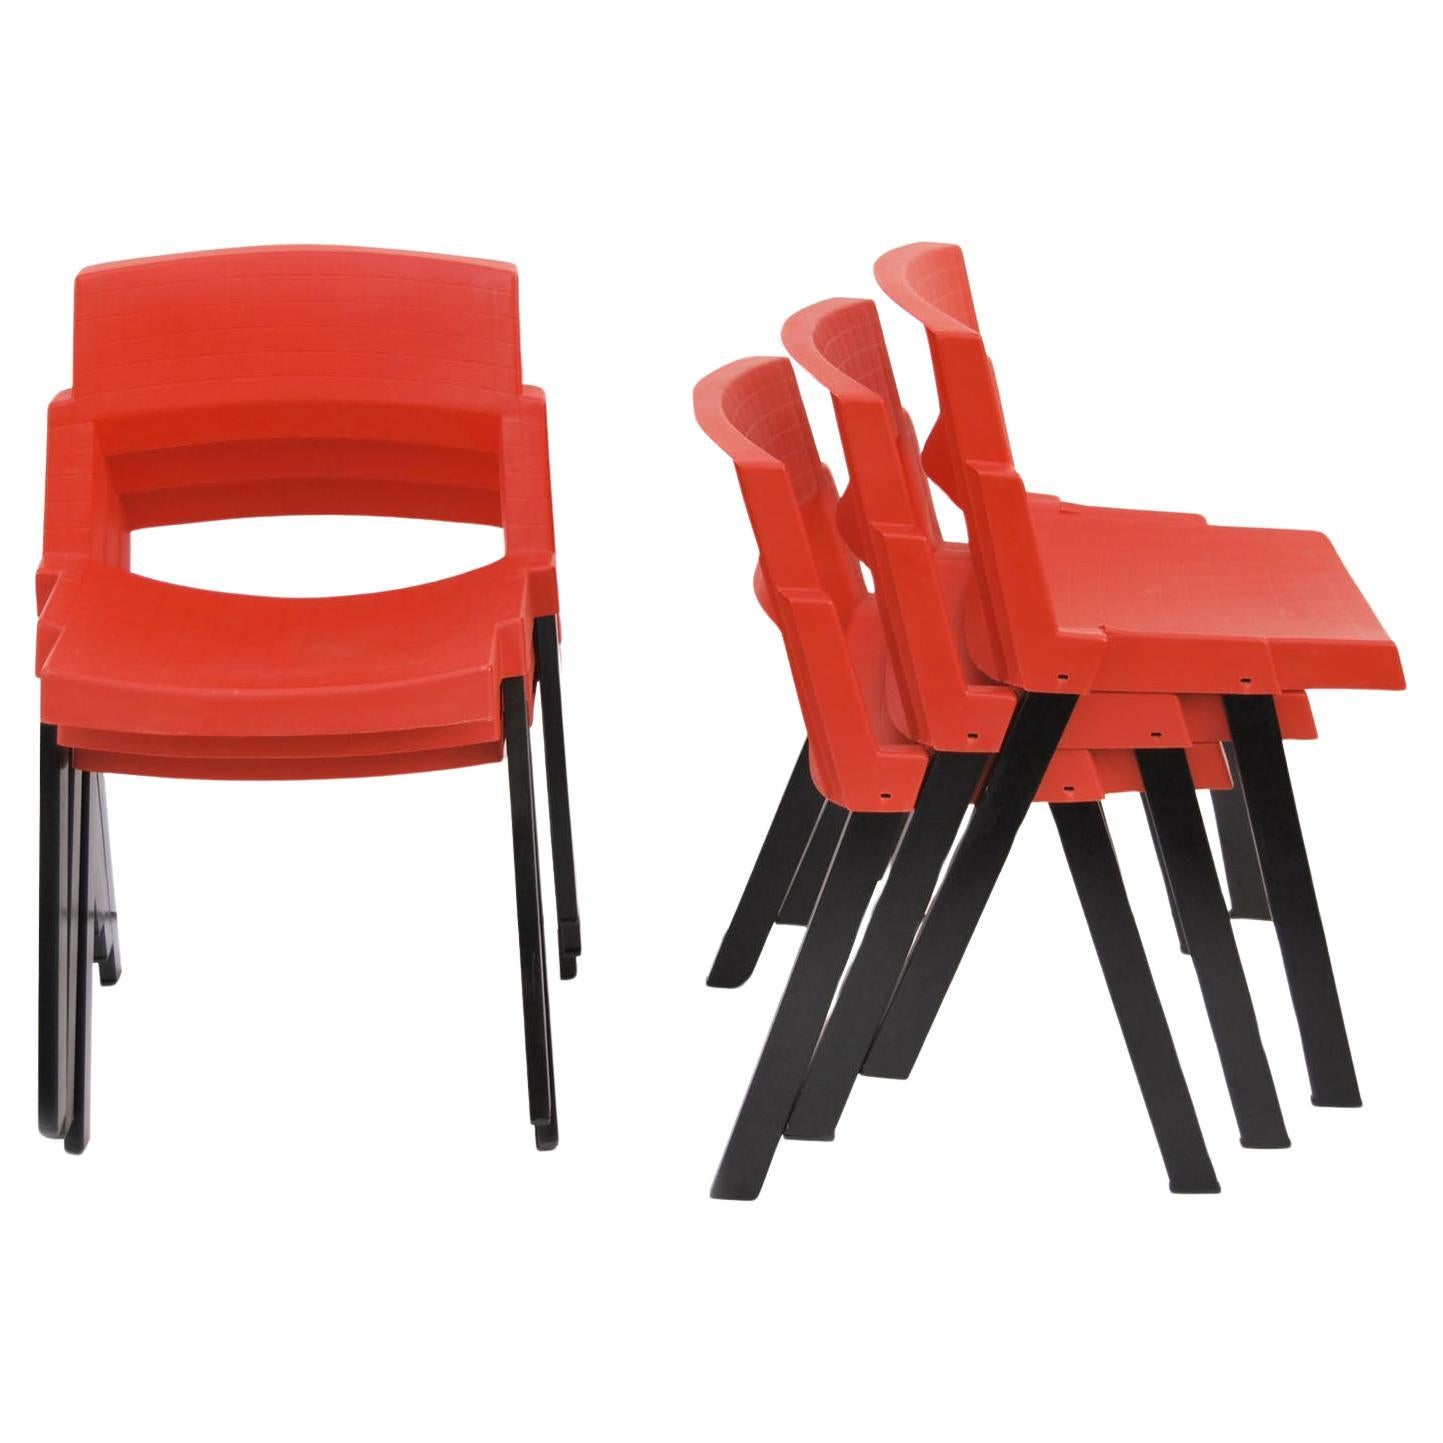 Roberto Lucci Chairs